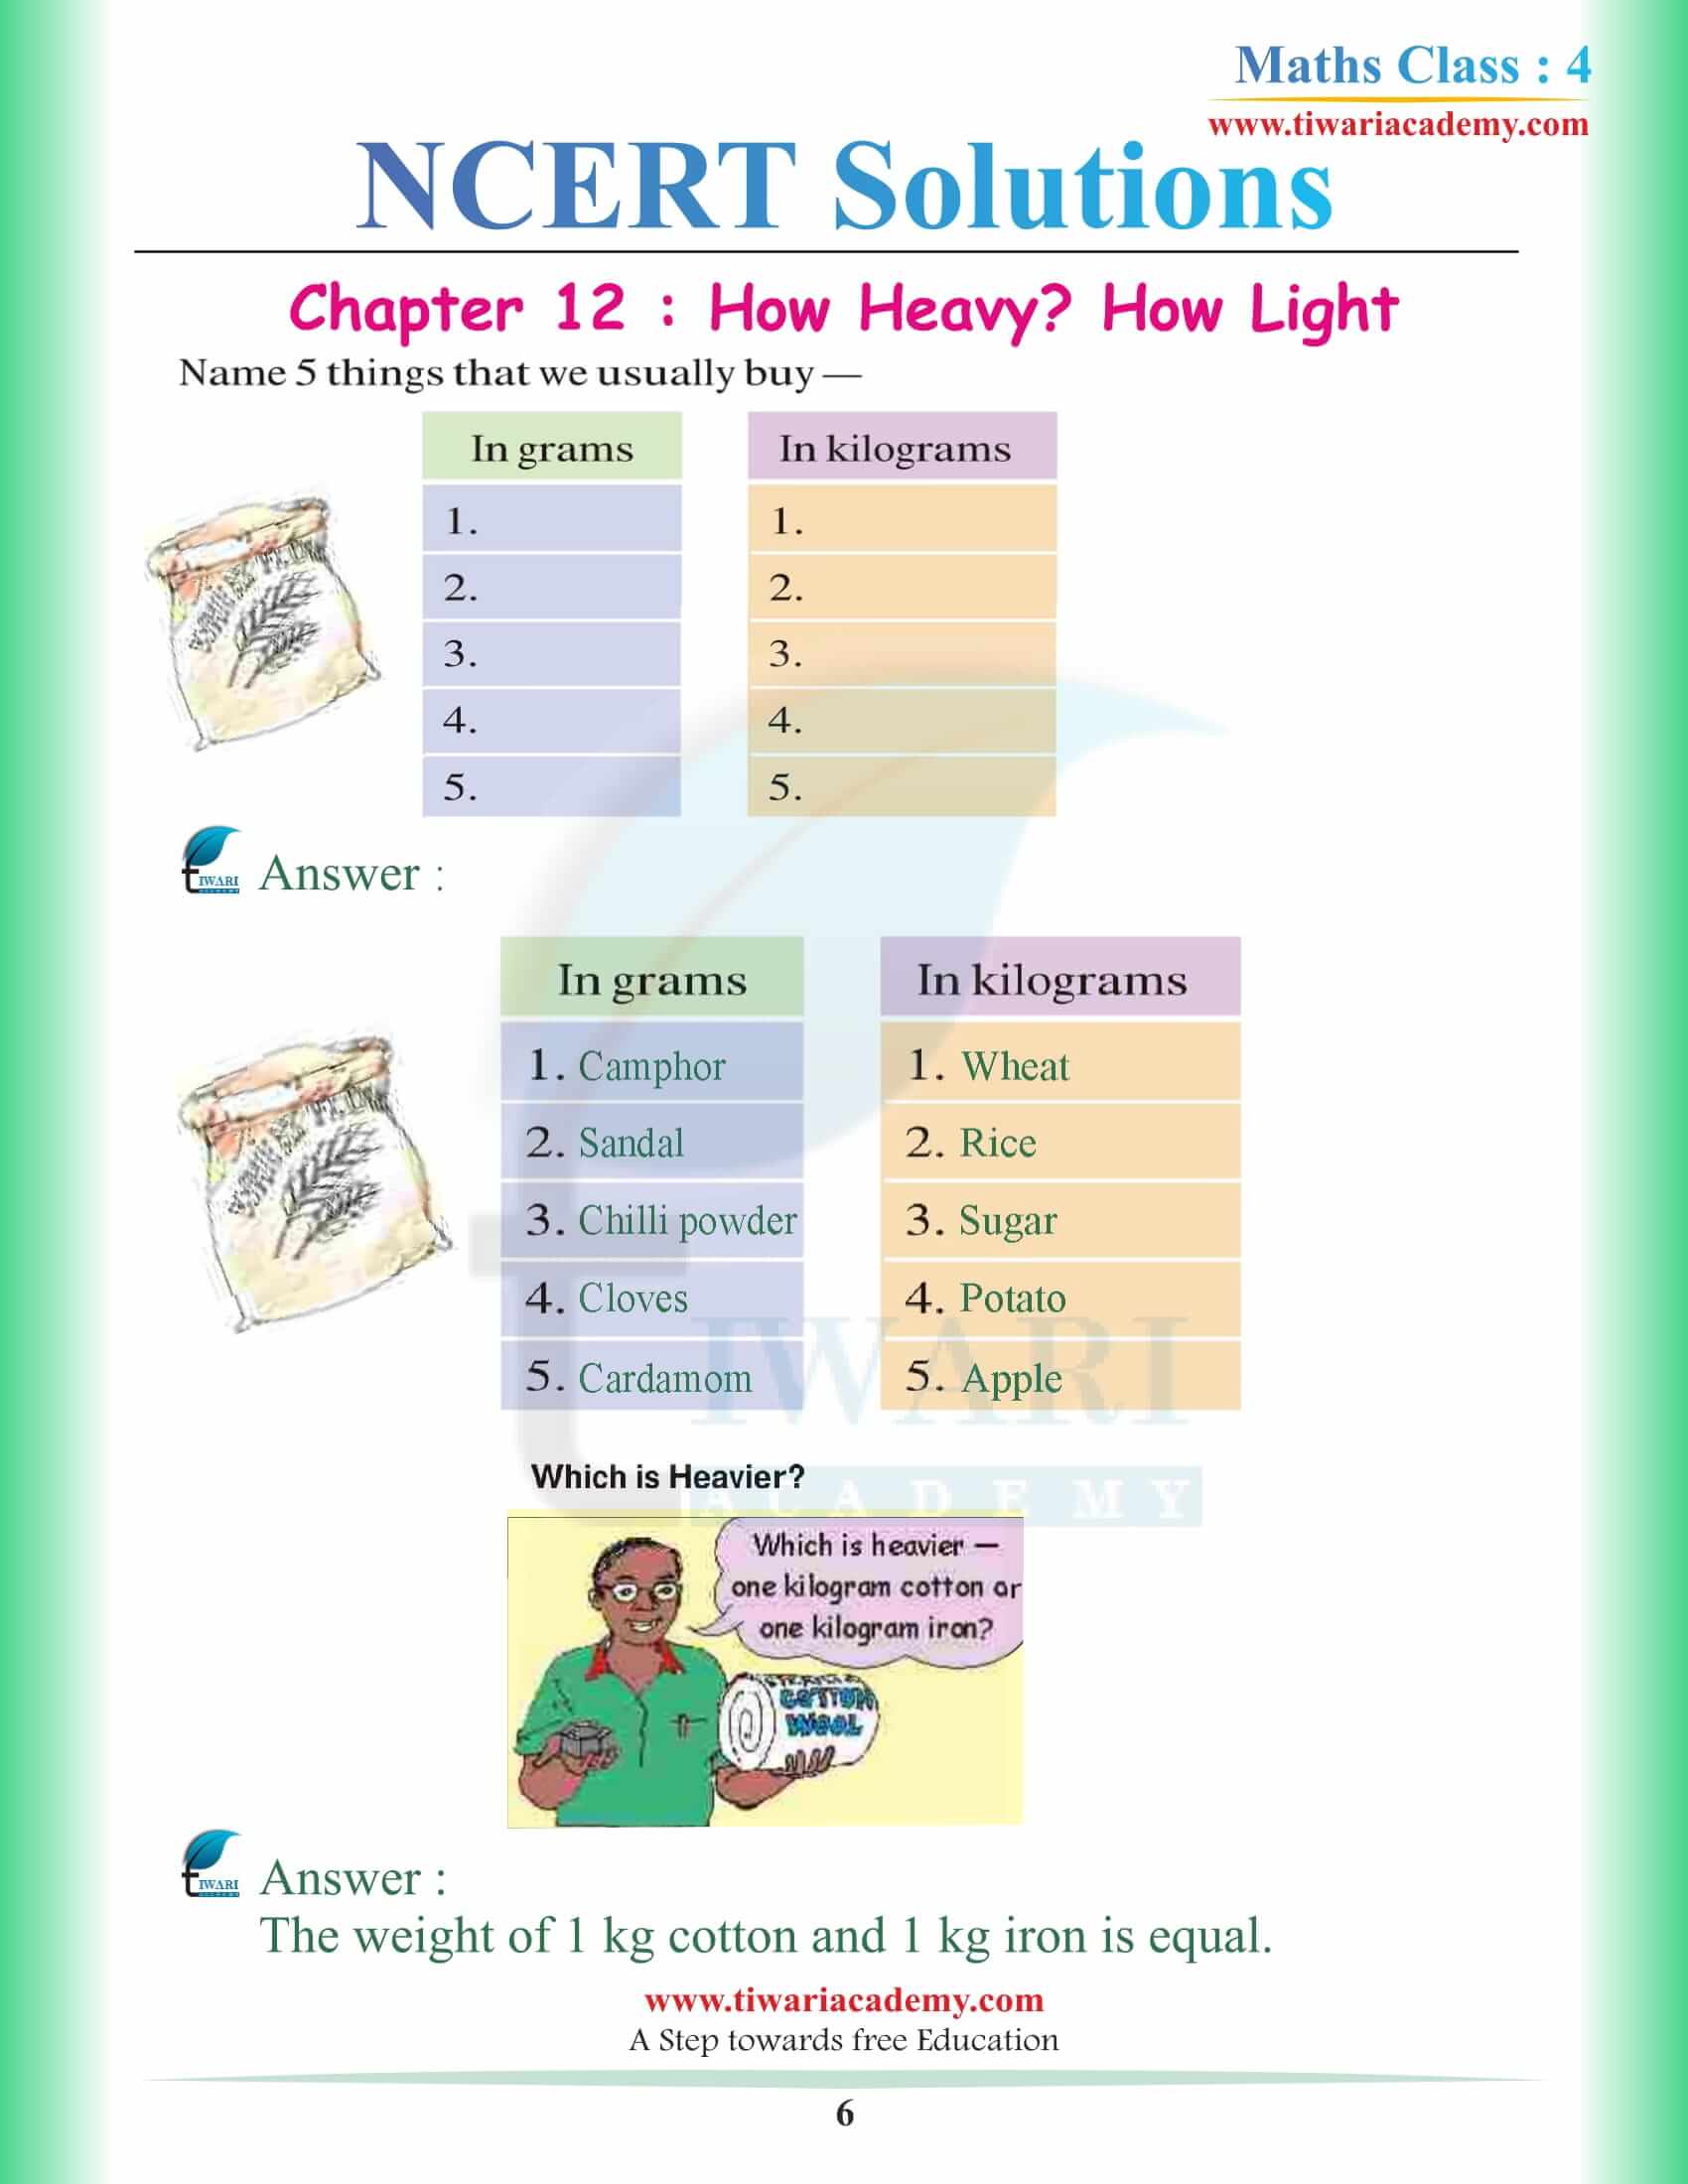 NCERT Solutions for Class 4 Maths Chapter 12 in English